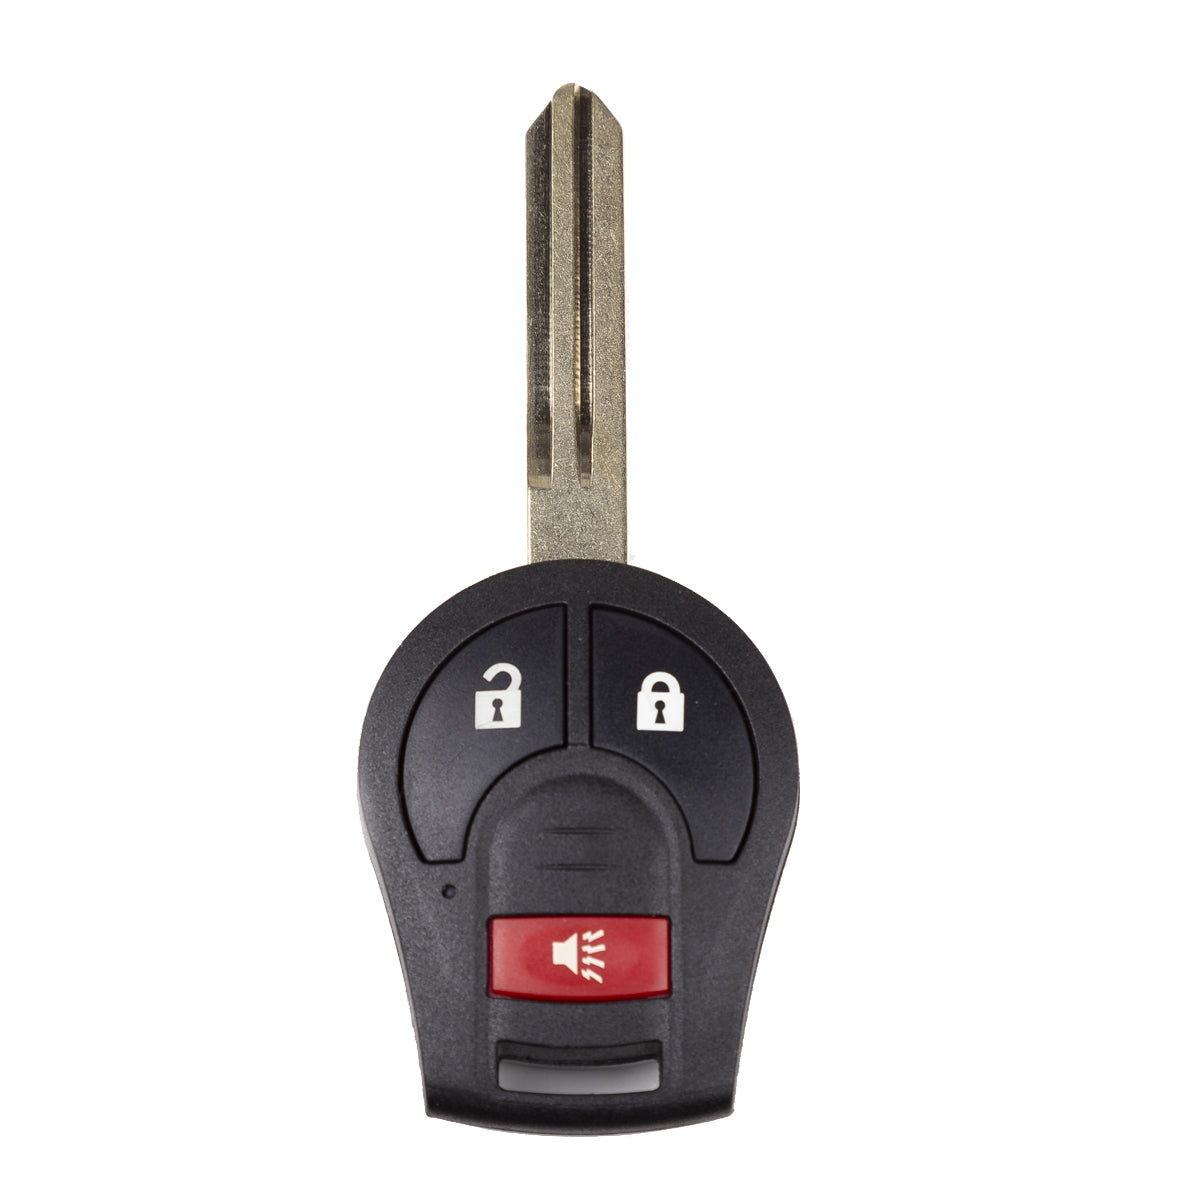 2010 Nissan Rogue Key Fob Replacement - Aftermarket - 3 Buttons Fob FCC# CWTWB1U751